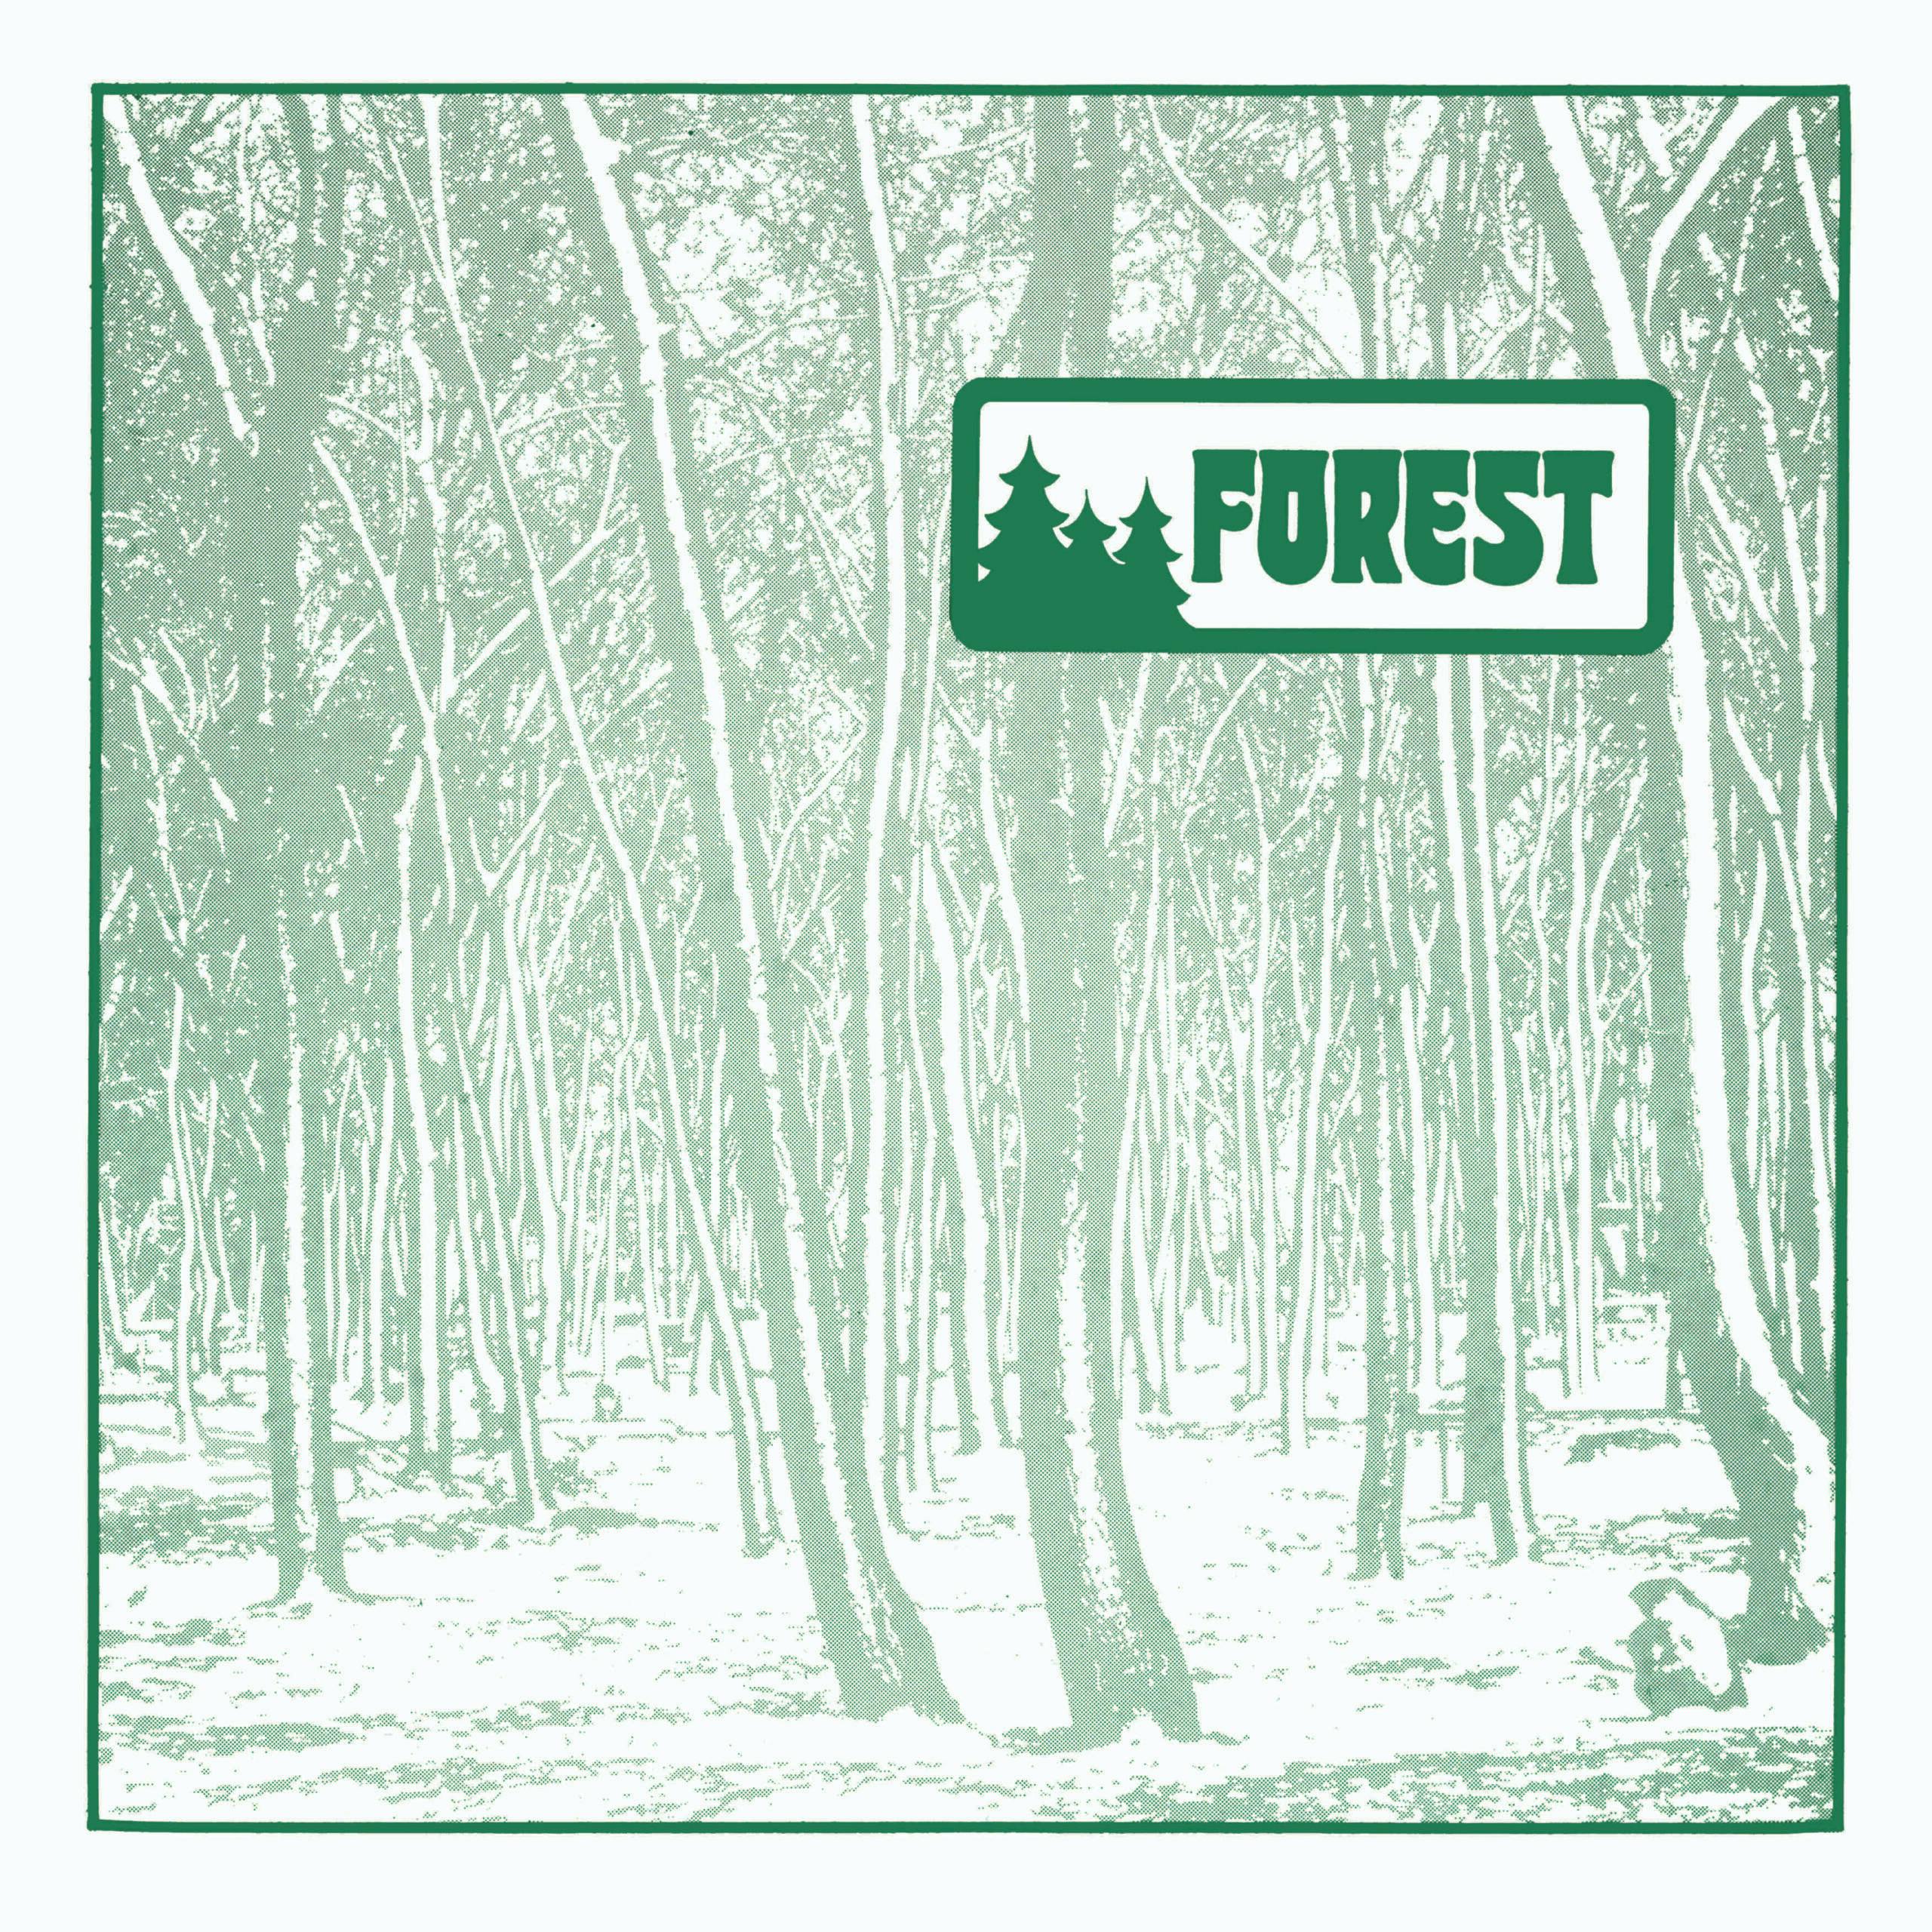 Long lost and much sought after Private Press from Western Massachusetts band Forest.